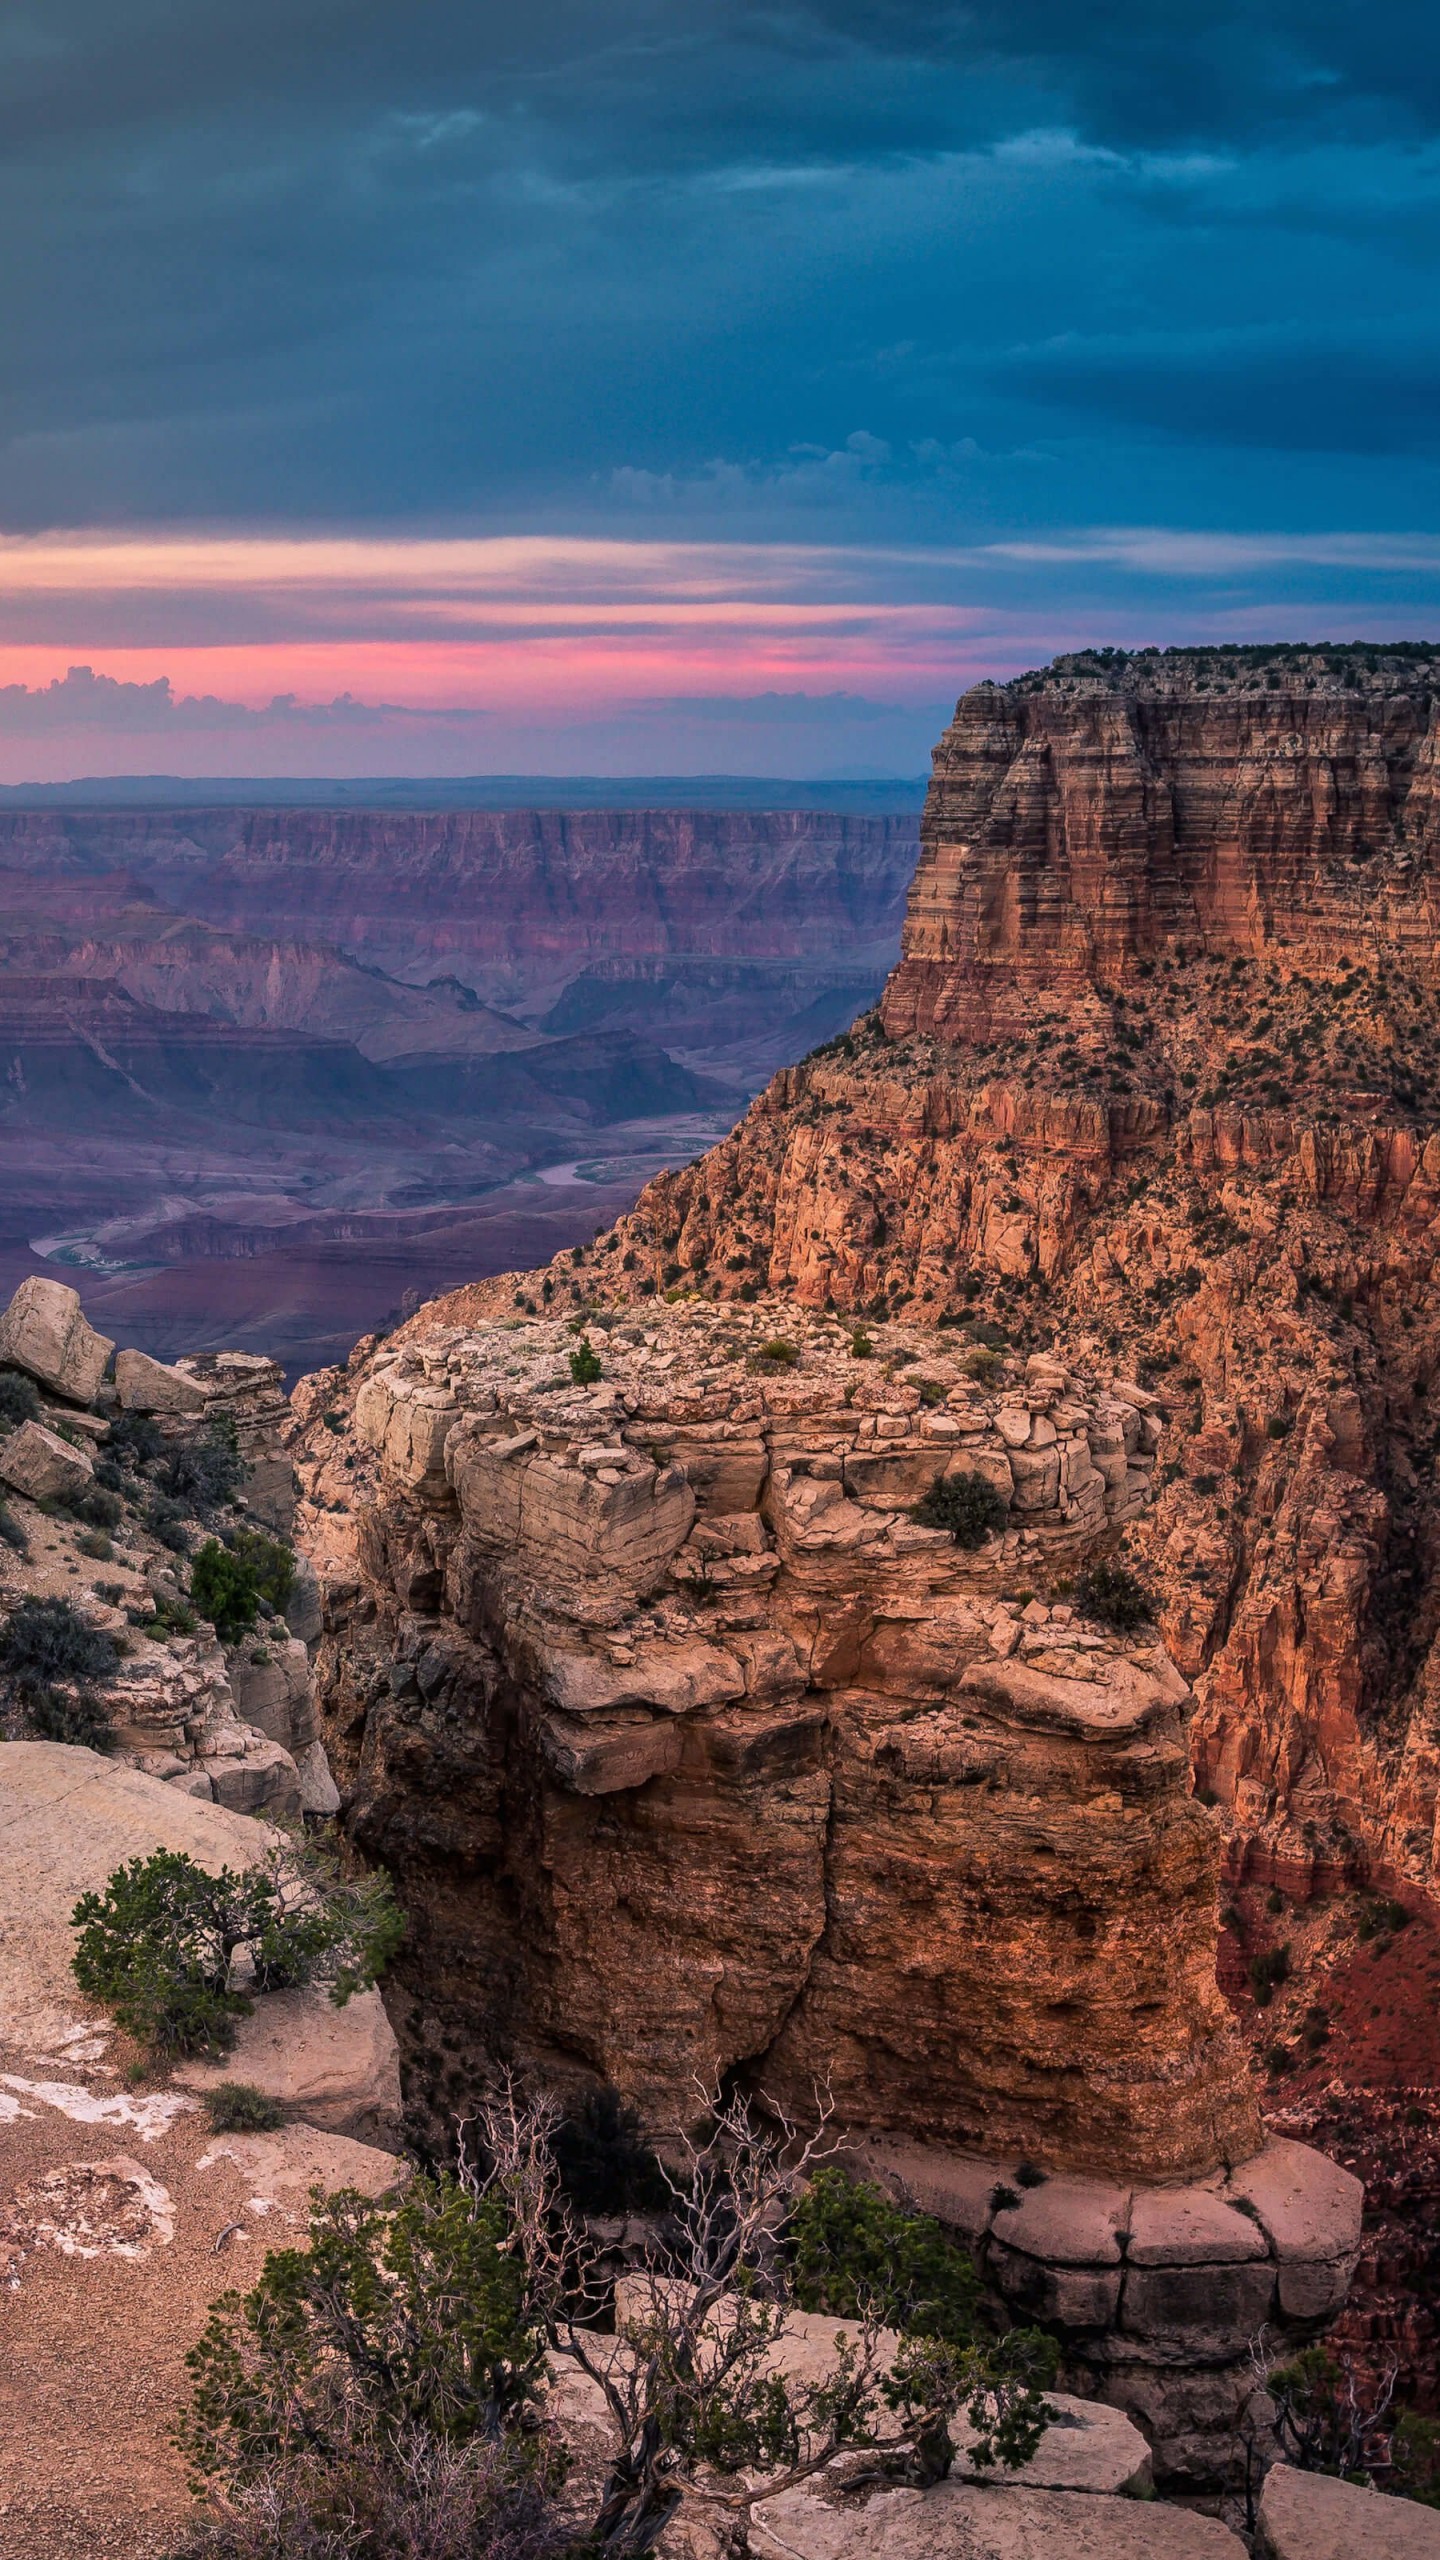 Sunset At The Grand Canyon Wallpaper for LG G3